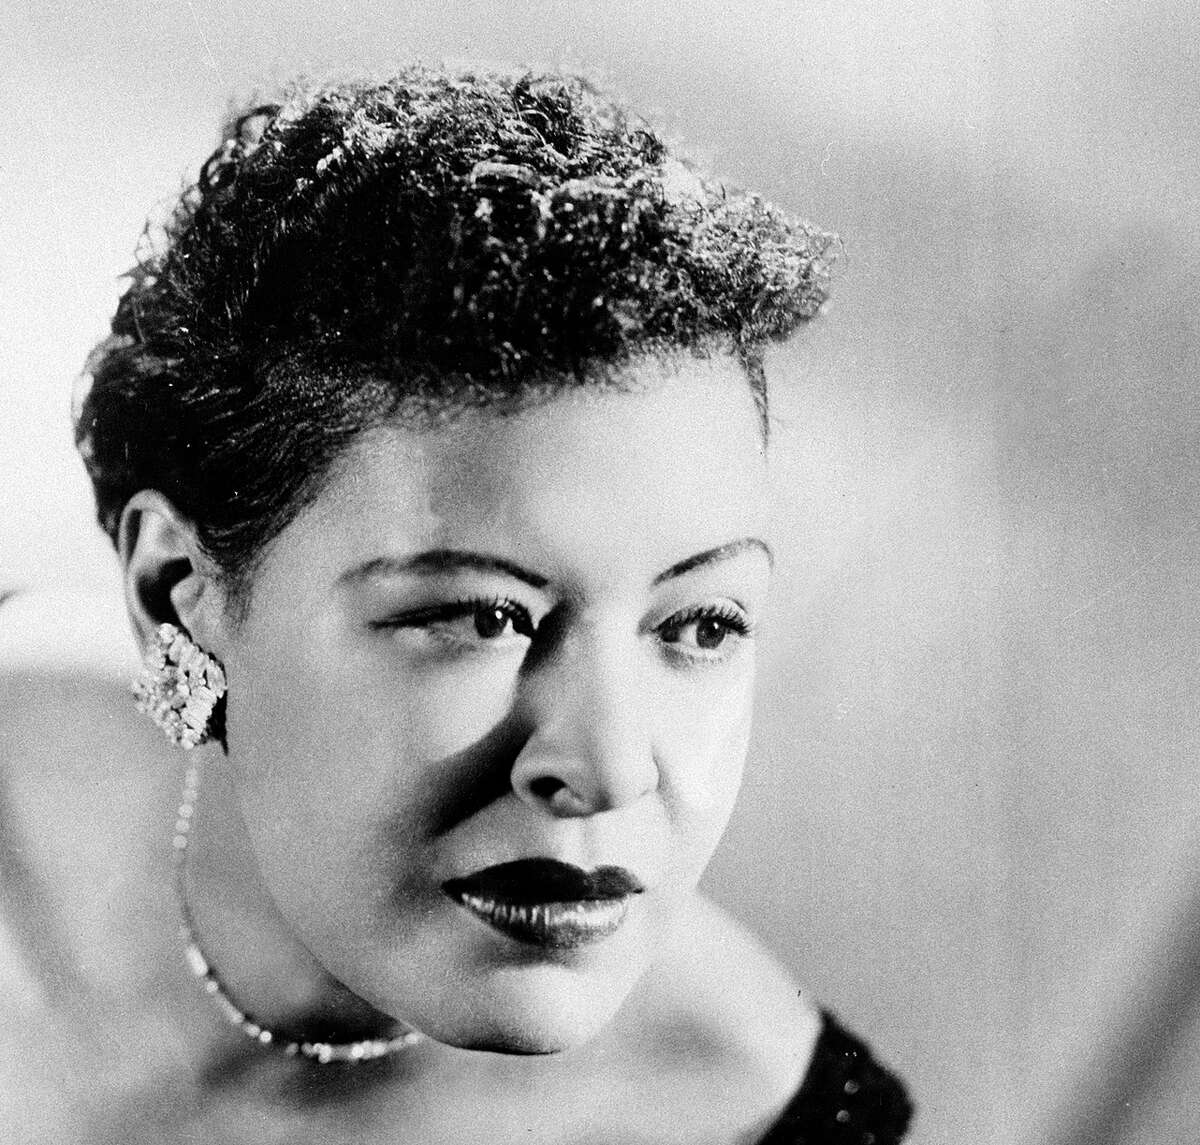 FILE - This Sept. 1958 file photo shows Billie Holiday. The Apollo Theater is planning events to commemorate the 100th birthday of Holiday. The legendary American jazz vocalist was born on April 17, 1915 and died in 1959 at the age of 44. Holiday performed at least two dozen times at the Apollo. She will be inducted into its Walk of Fame on April 16, 2015. (AP Photo/FILE)